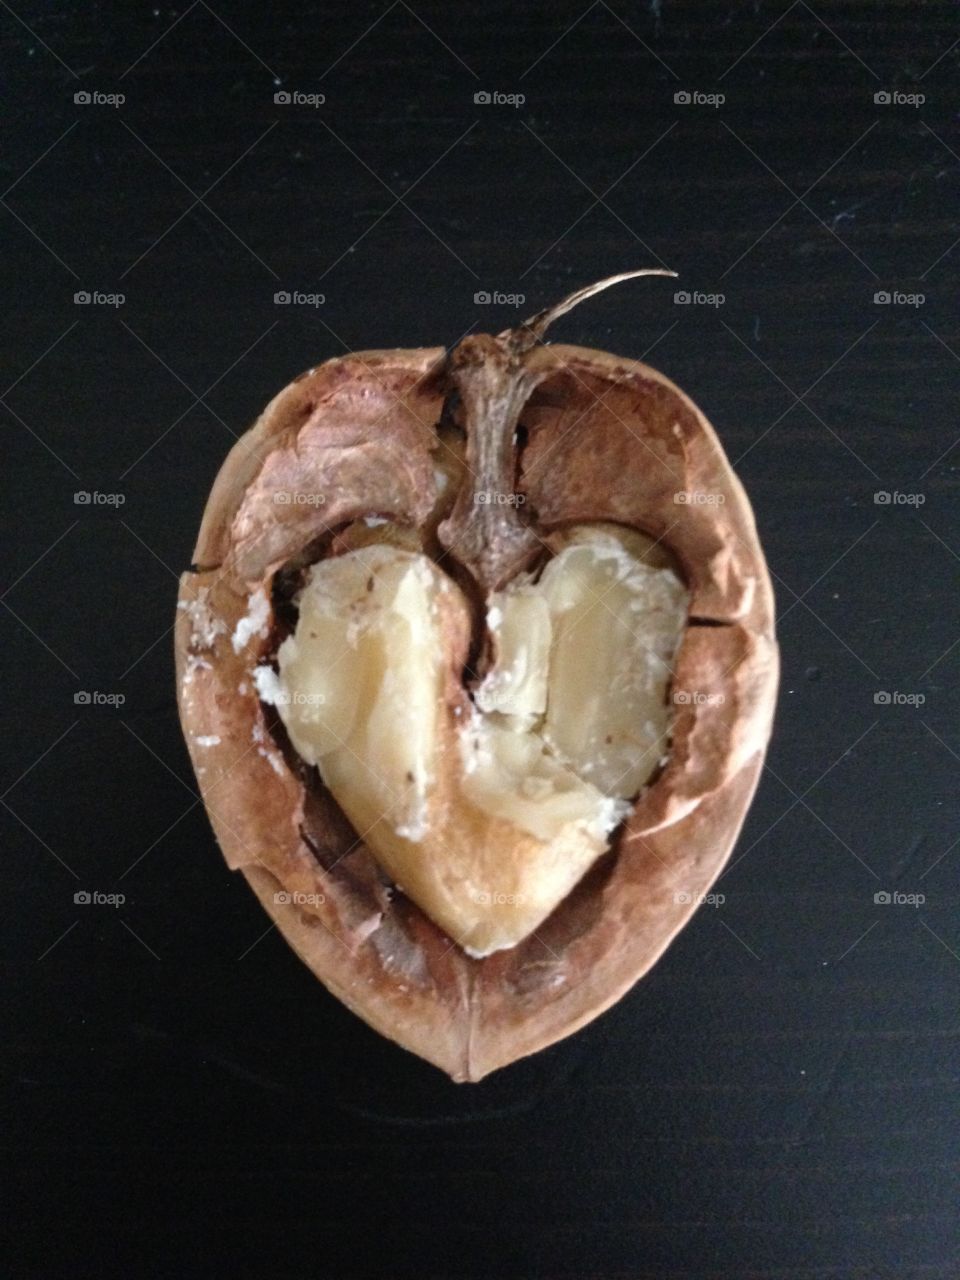 There's a ❤ in my walnut!